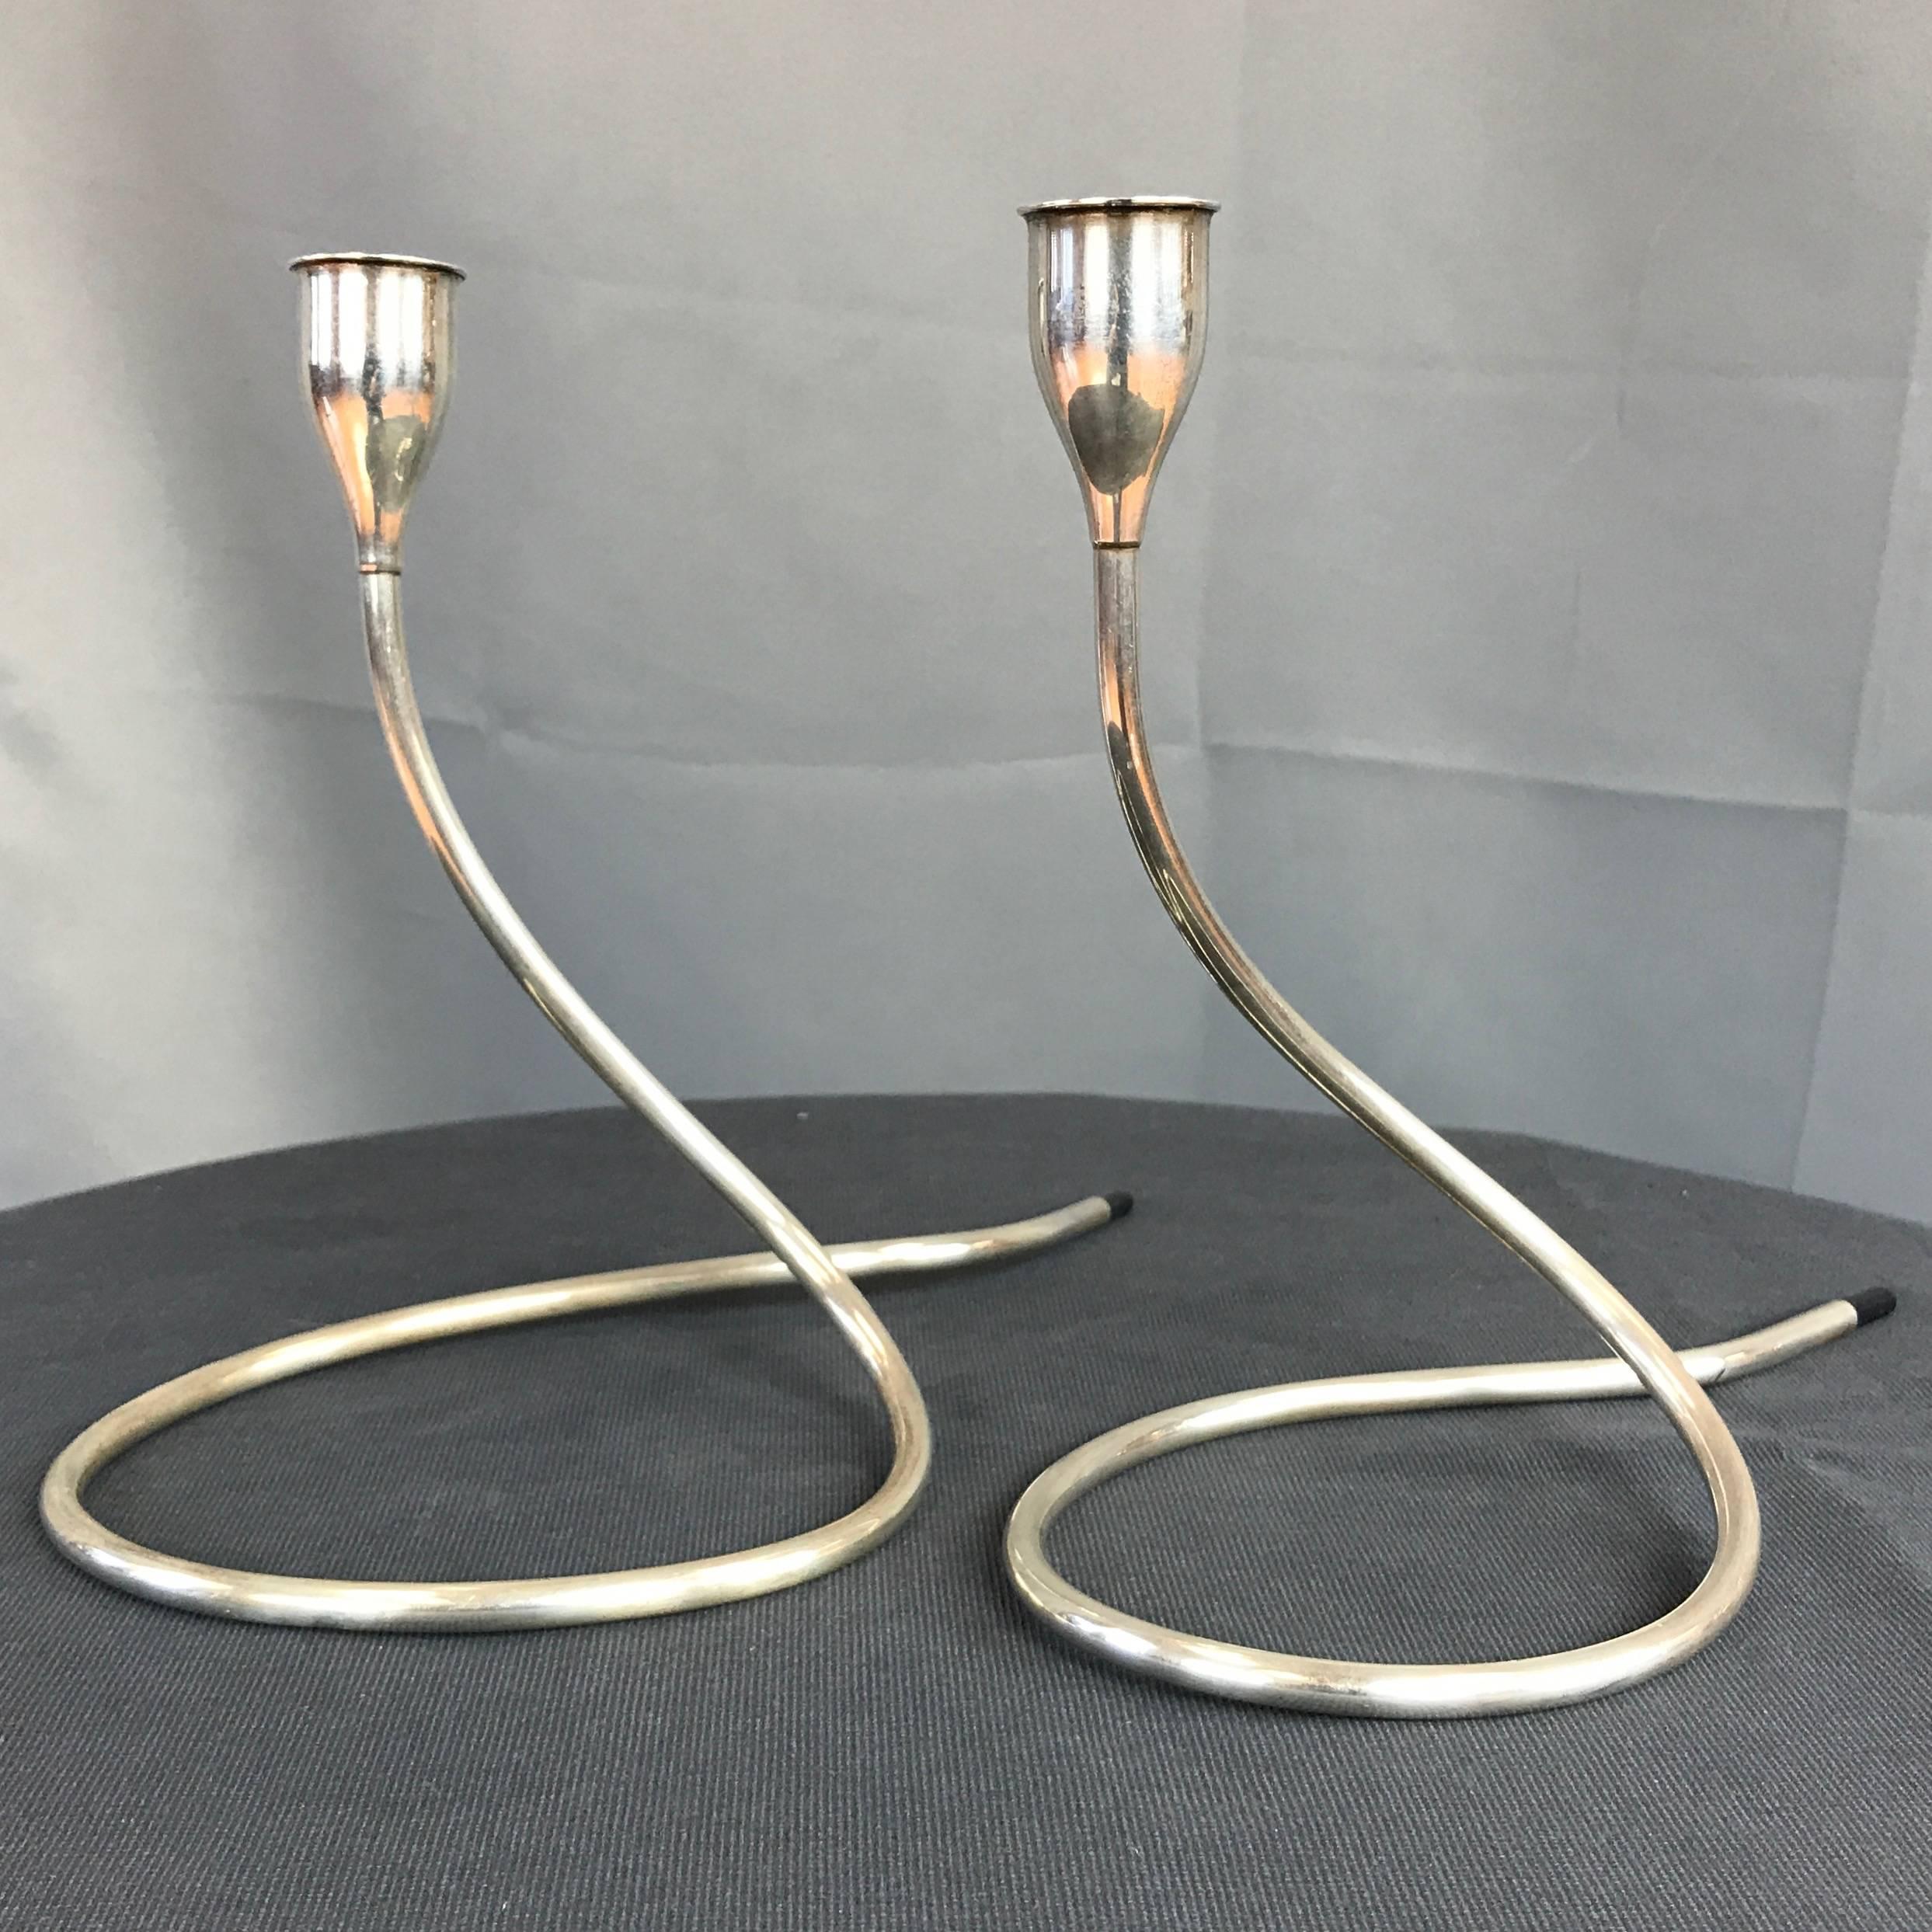 A pair of sterling silver candleholders by Marion Anderson Noyes for Towle.

Very elegant serpentine design evokes a coiled cobra with a sleek head and plastic tipped tail. “TOWLE STERLING – 11 – FILLED REINFORCED” impressed on interior bottom of